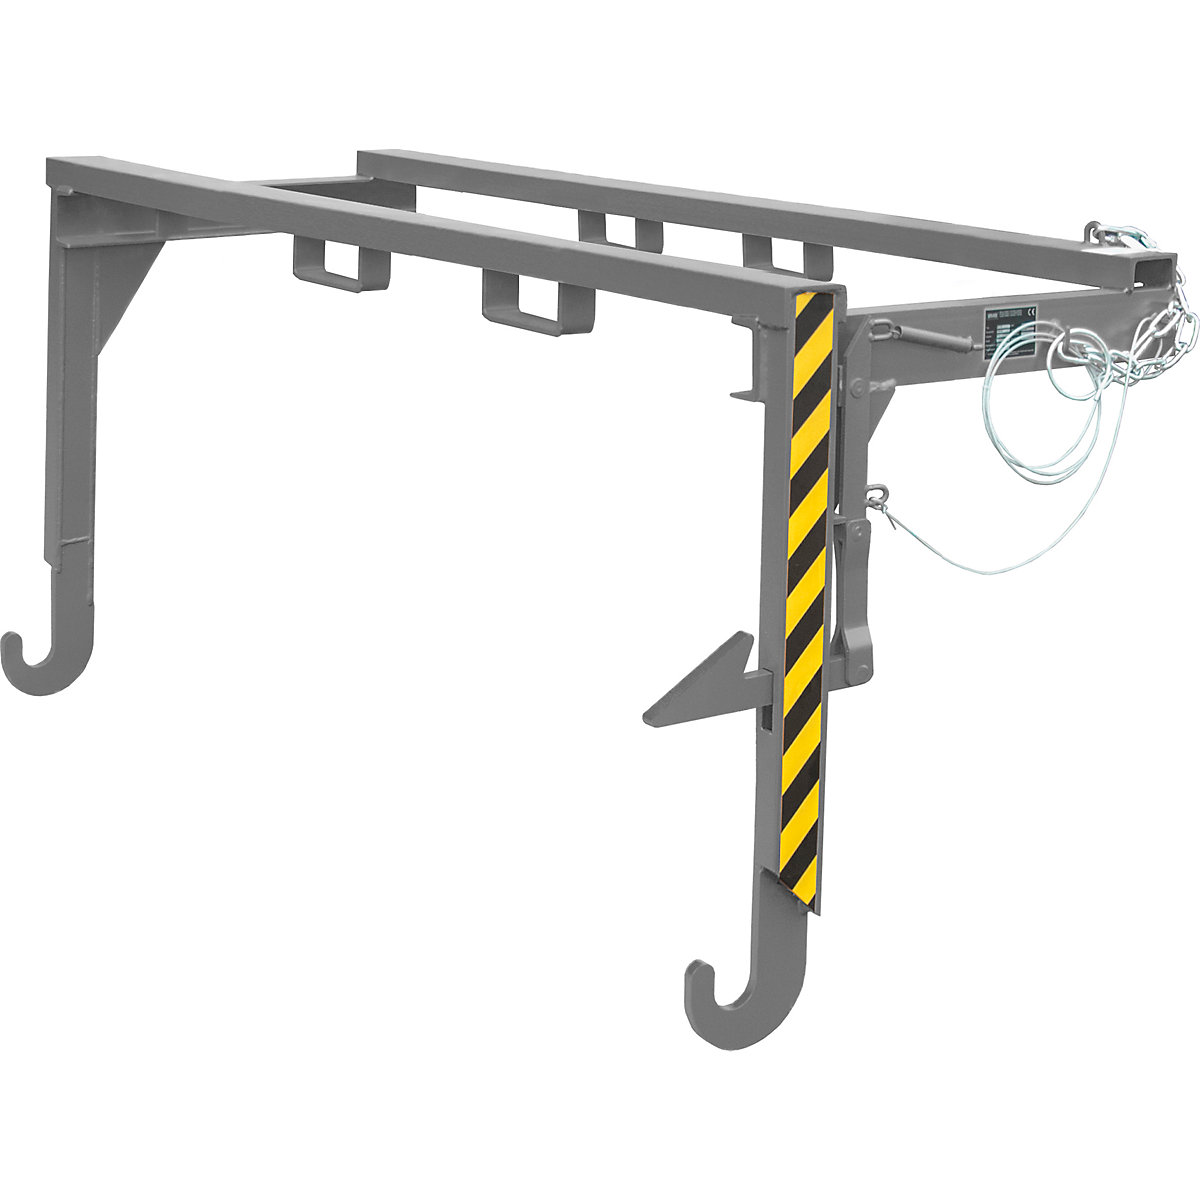 Forklift support bar for tilting skips and stacking containers – eurokraft pro, not for cranes, max. load 2000 kg, for container size 2 m³